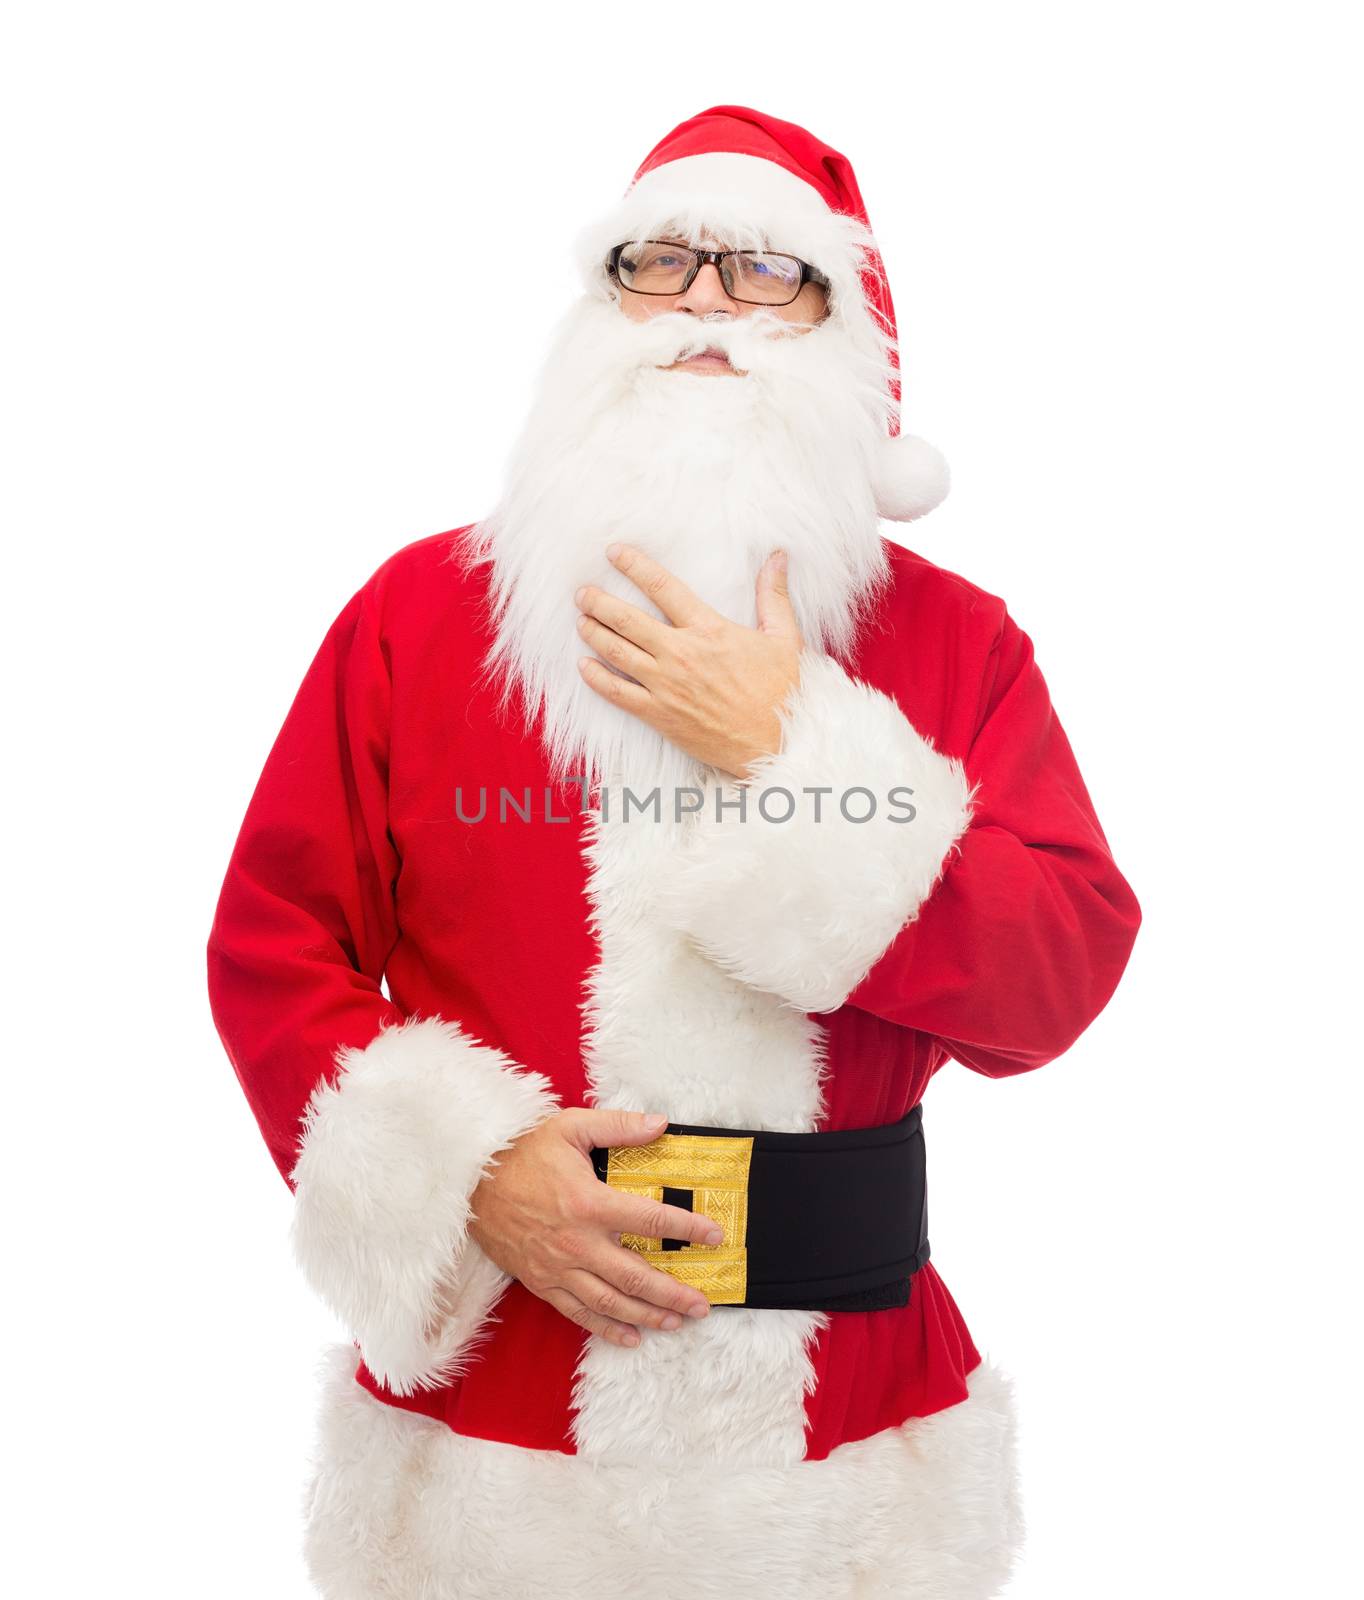 christmas, holidays and people concept - man in costume of santa claus